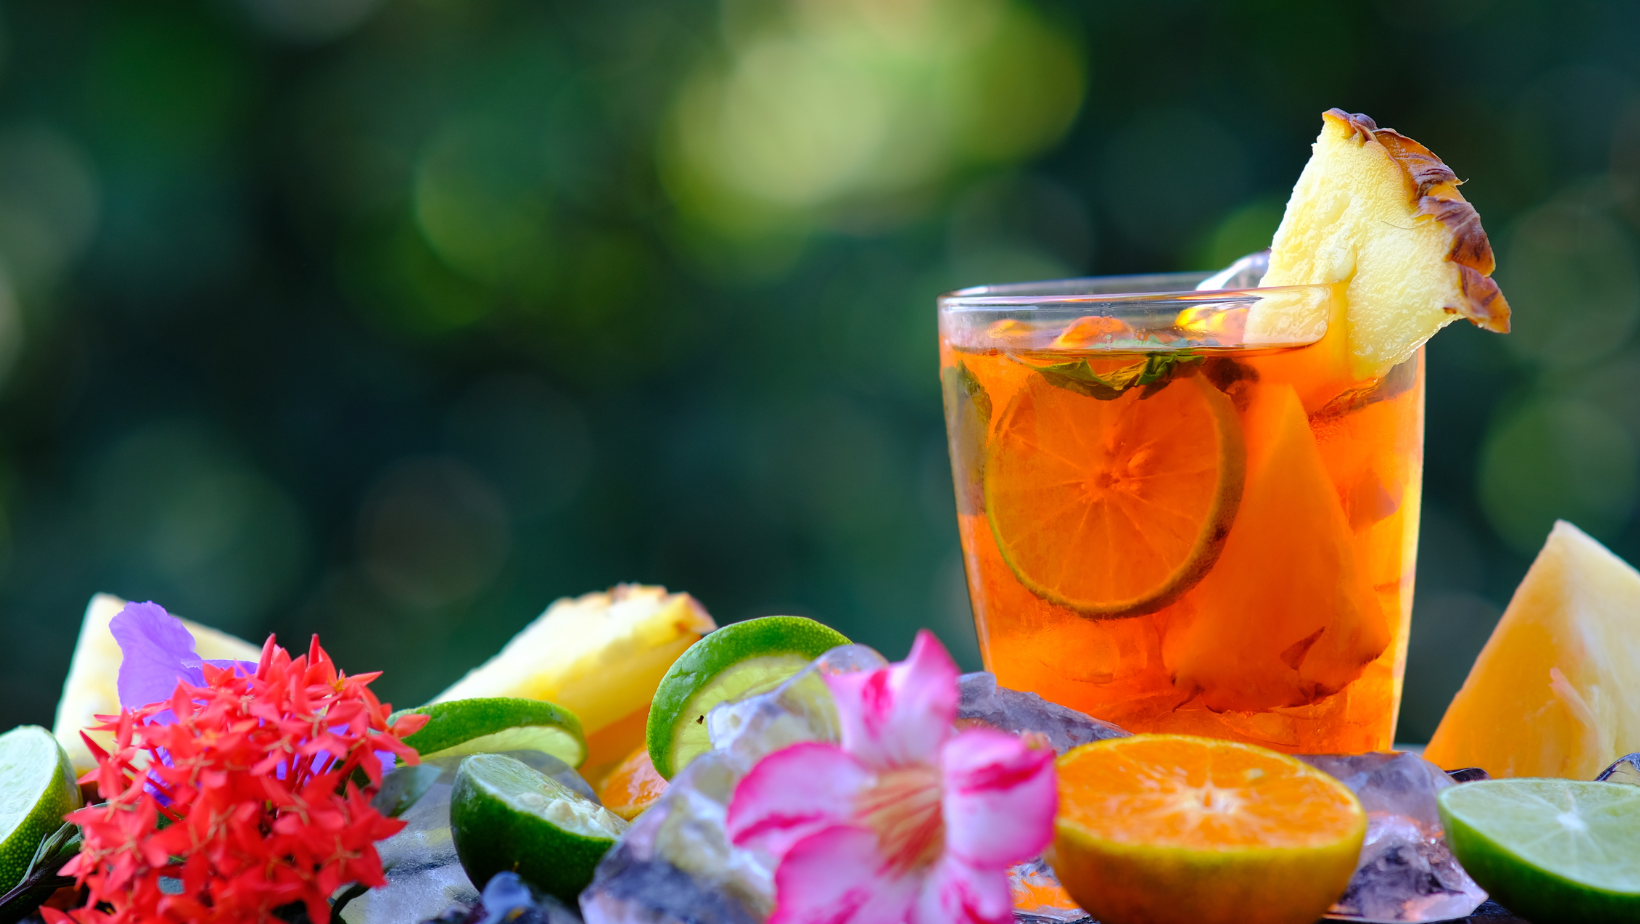 How to Make a Weed-Infused Fruit Punch for Summer